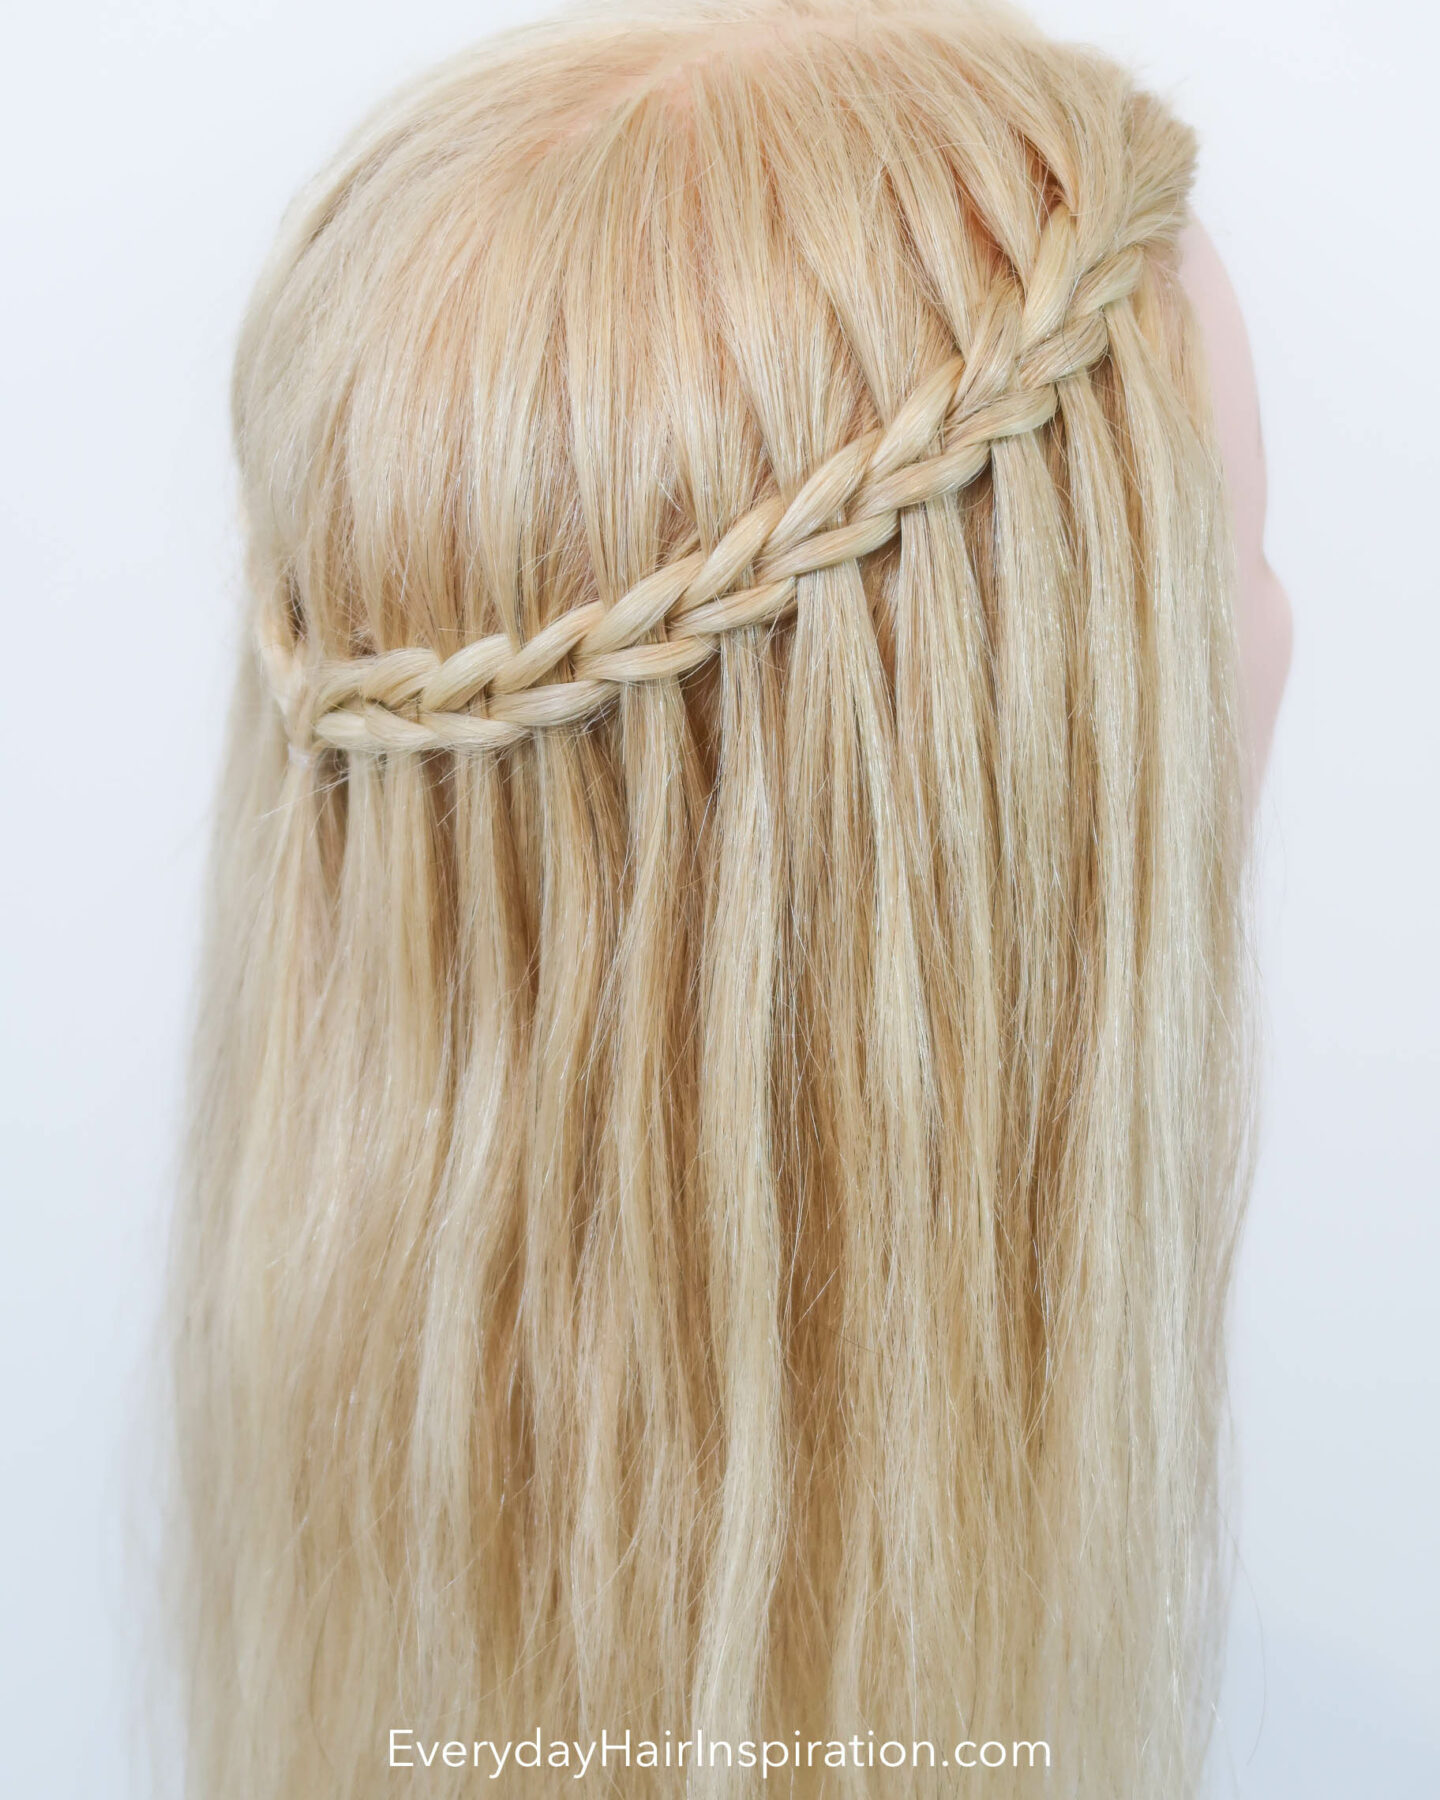 Blonde hairdresser head with a half up half down hair styles with a scissor waterfall braid, seen from the back at an angle.